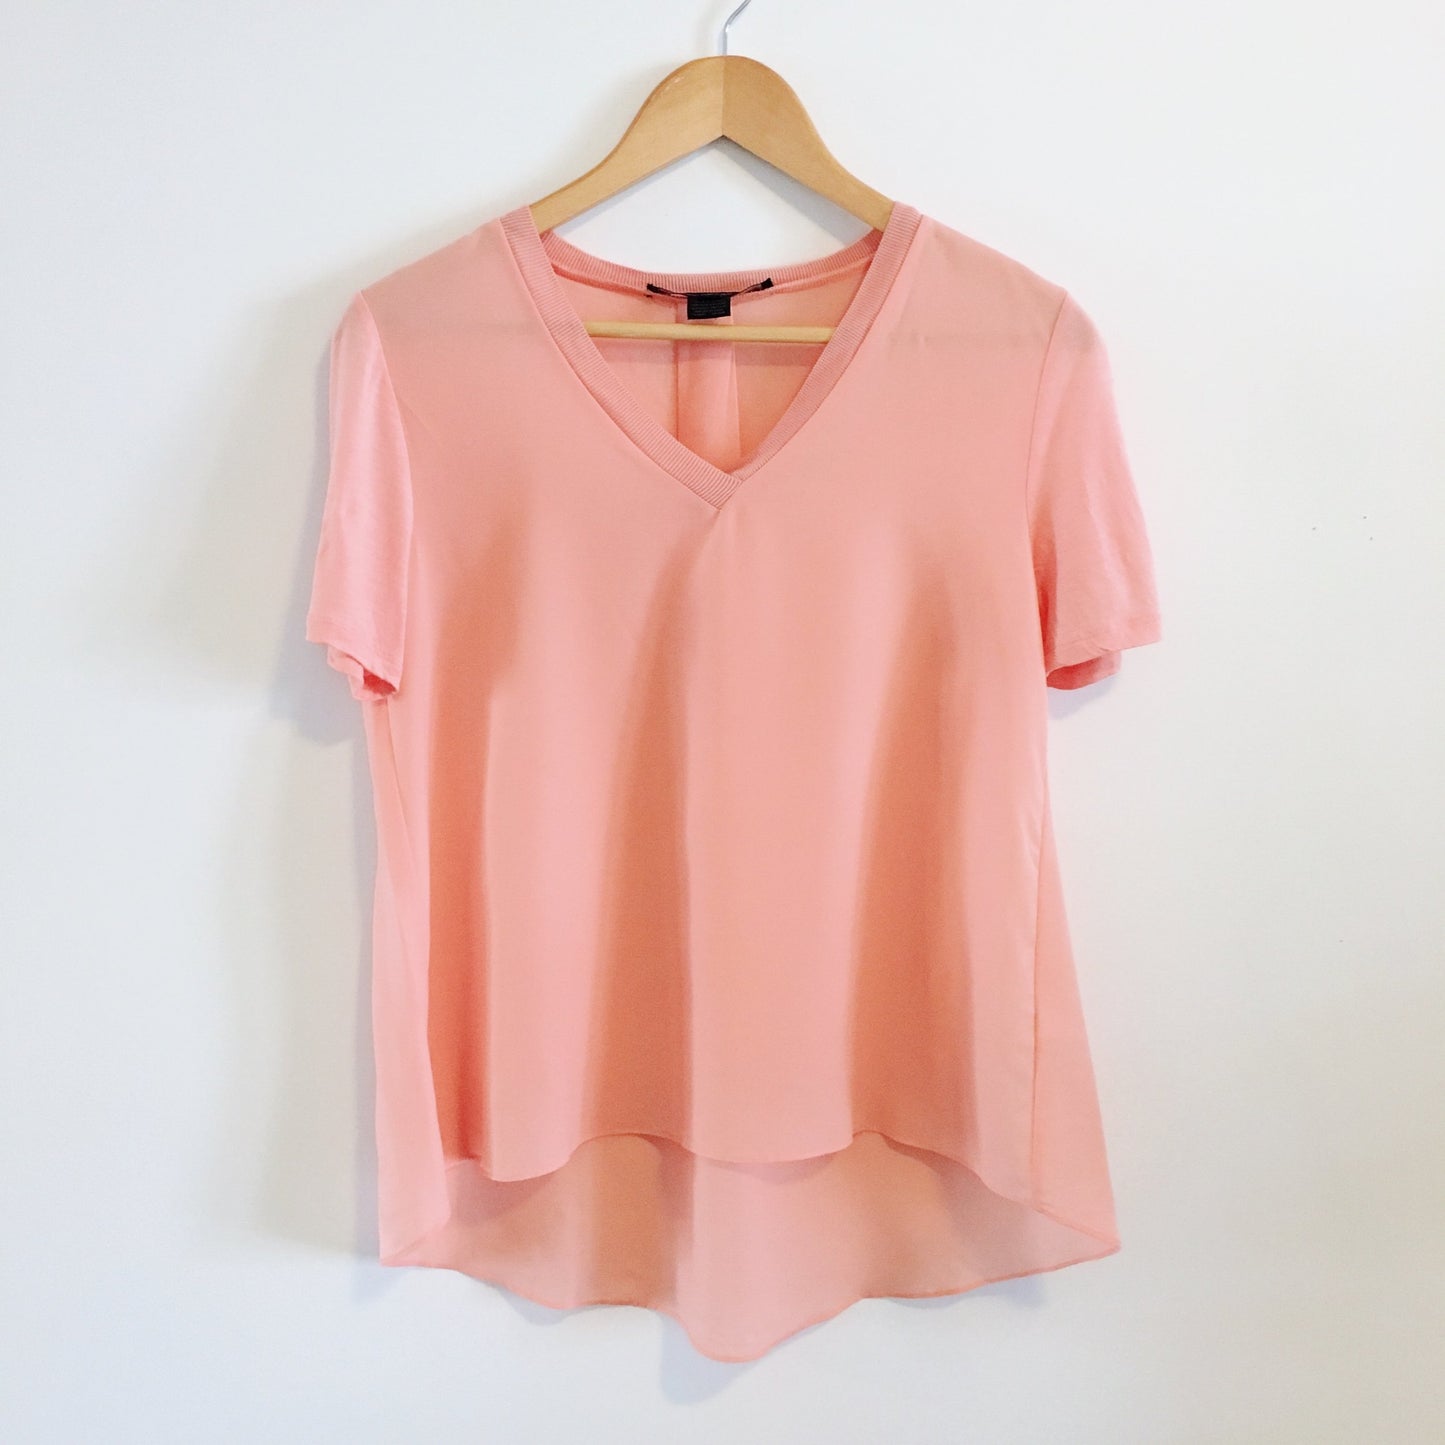 French Connection Coral Blouse Tee - size Small